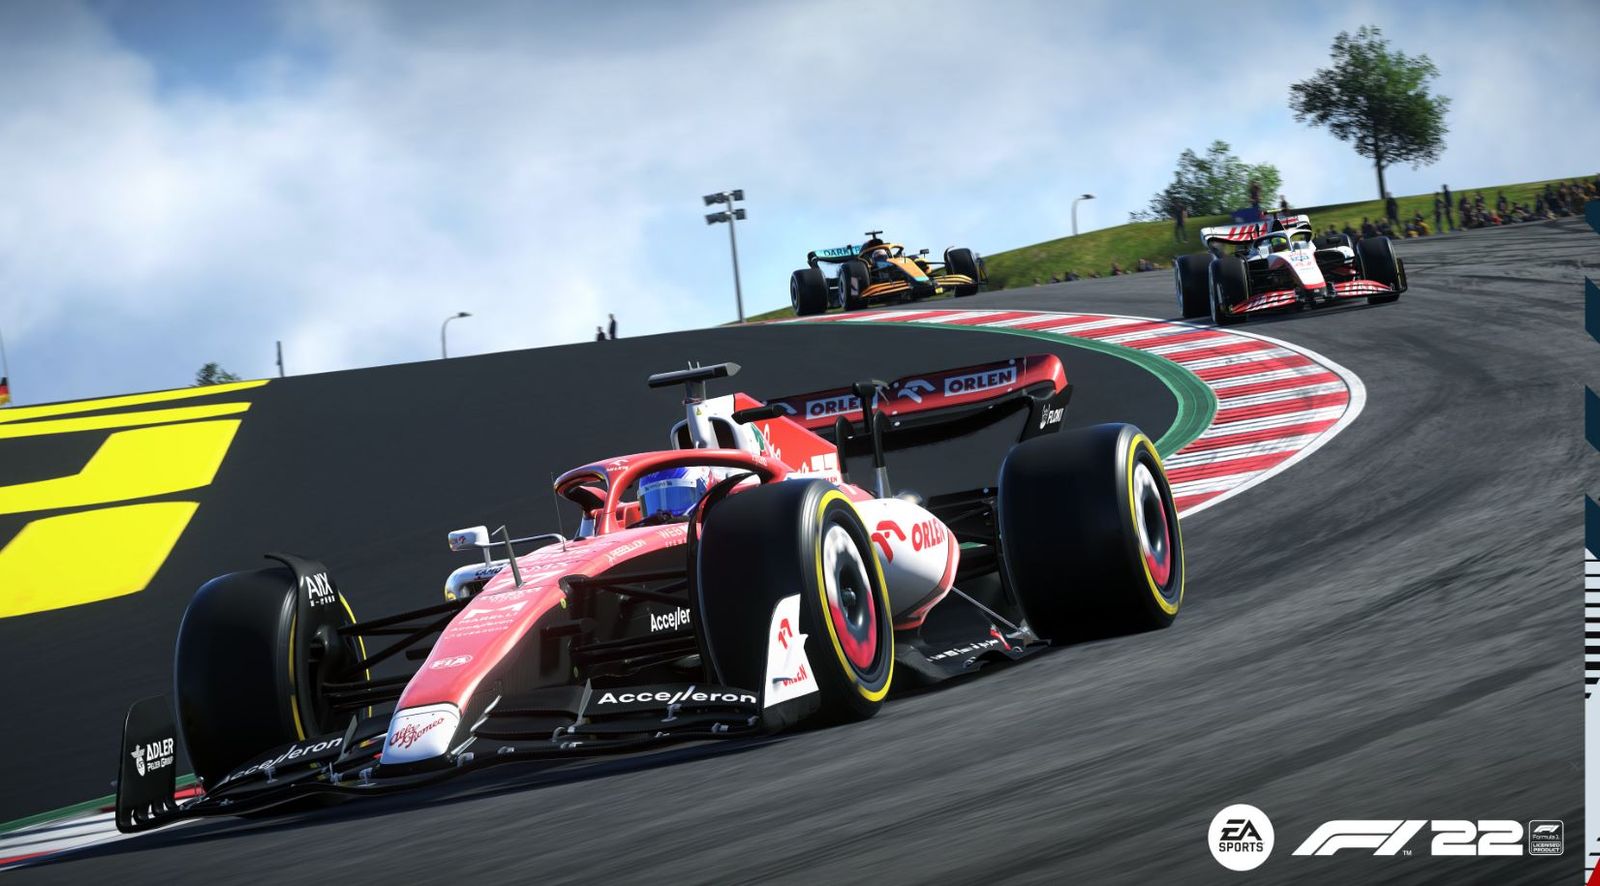 F1 22 cross-play multiplayer trial